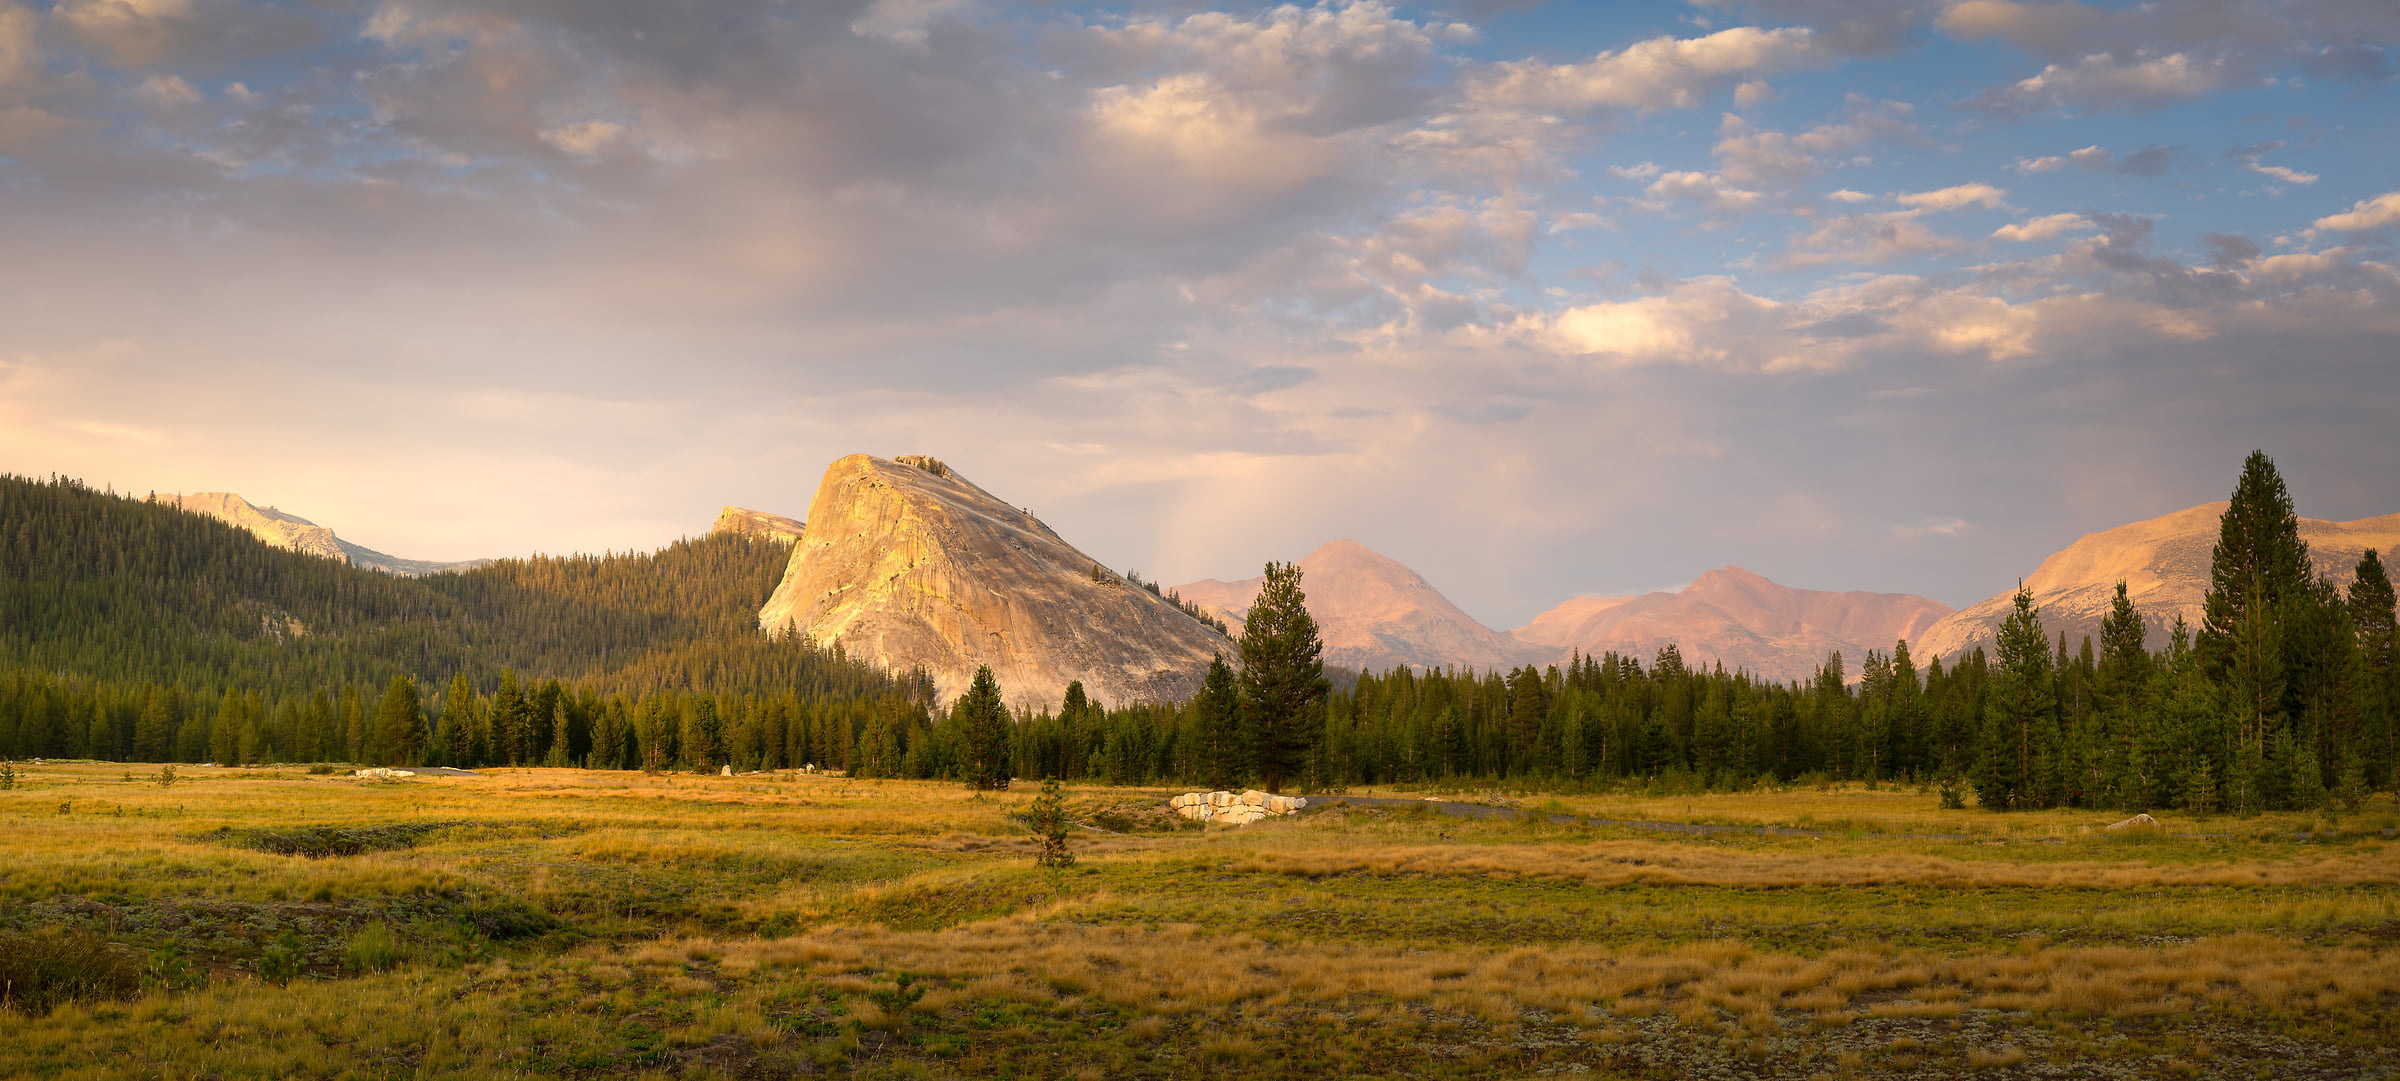 232 megapixels! A very high resolution, large-format VAST photo print of a landscape scene with a meadow, mountains, sky, and sunset; landscape photograph created by Jeff Lewis in Tuolumne Meadows, Yosemite National Park, California.